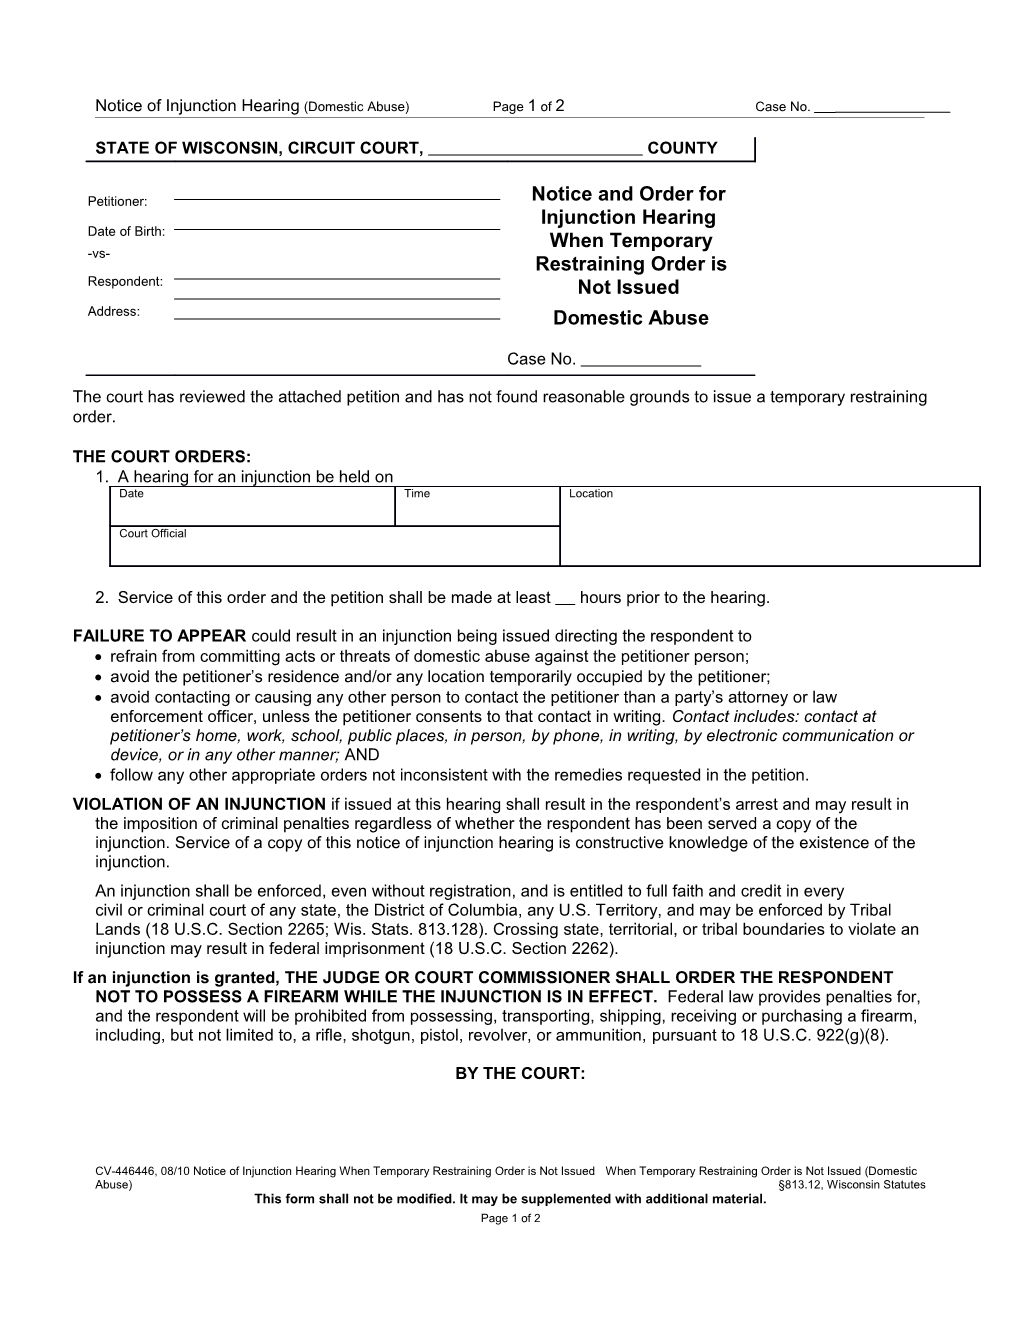 CV-446: Notice and Order for Injunction Hearing When Temporary Restraining Order Is Not